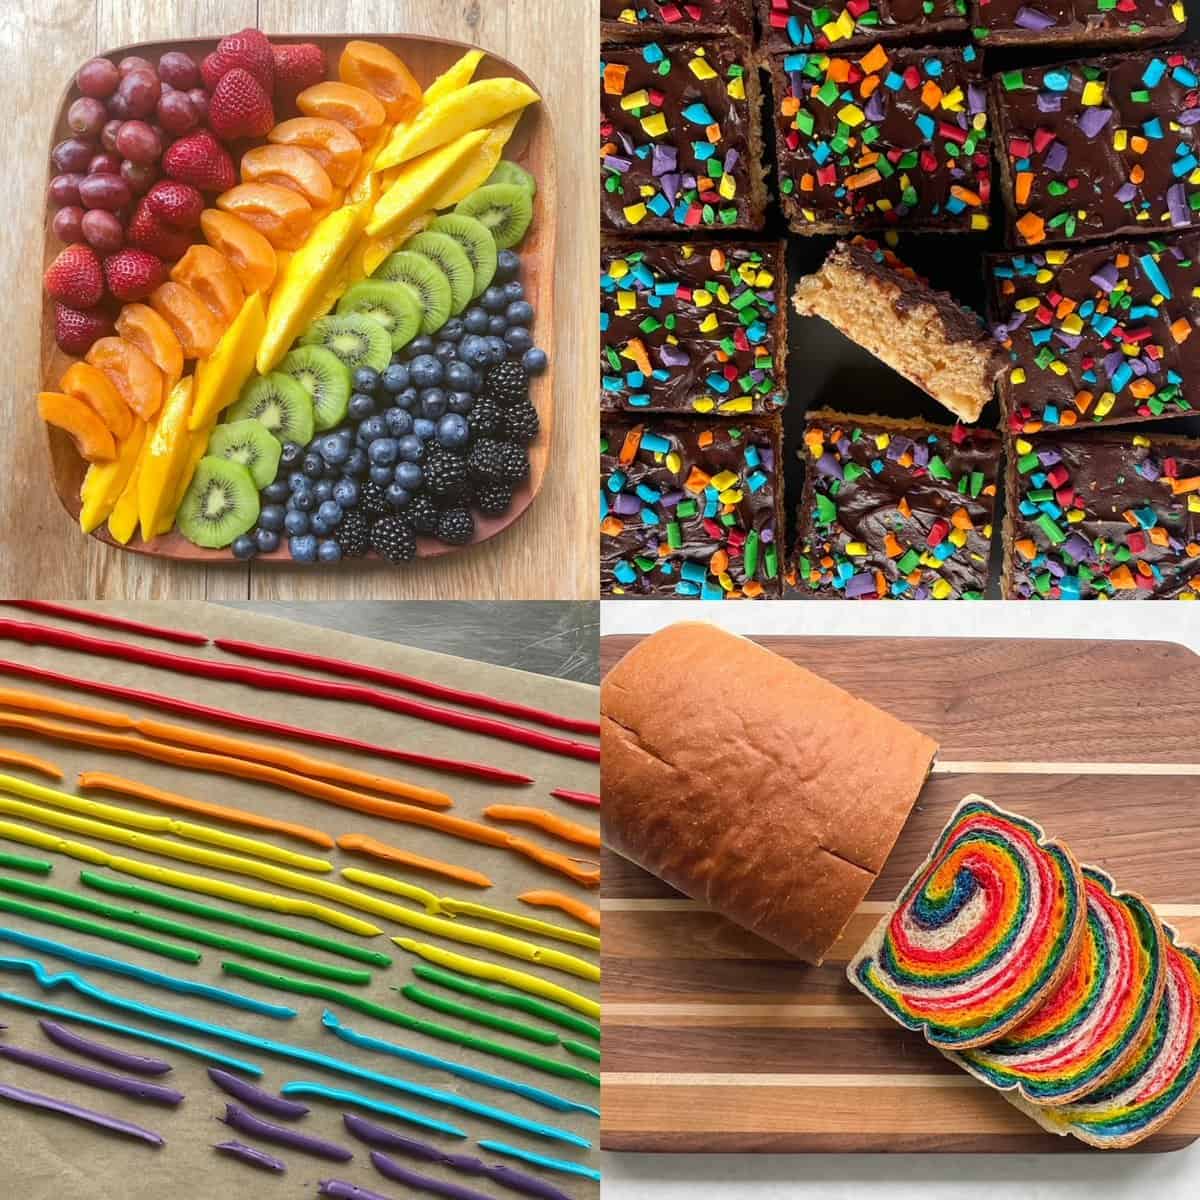 19 Rainbow Desserts and Other Rainbow Recipes